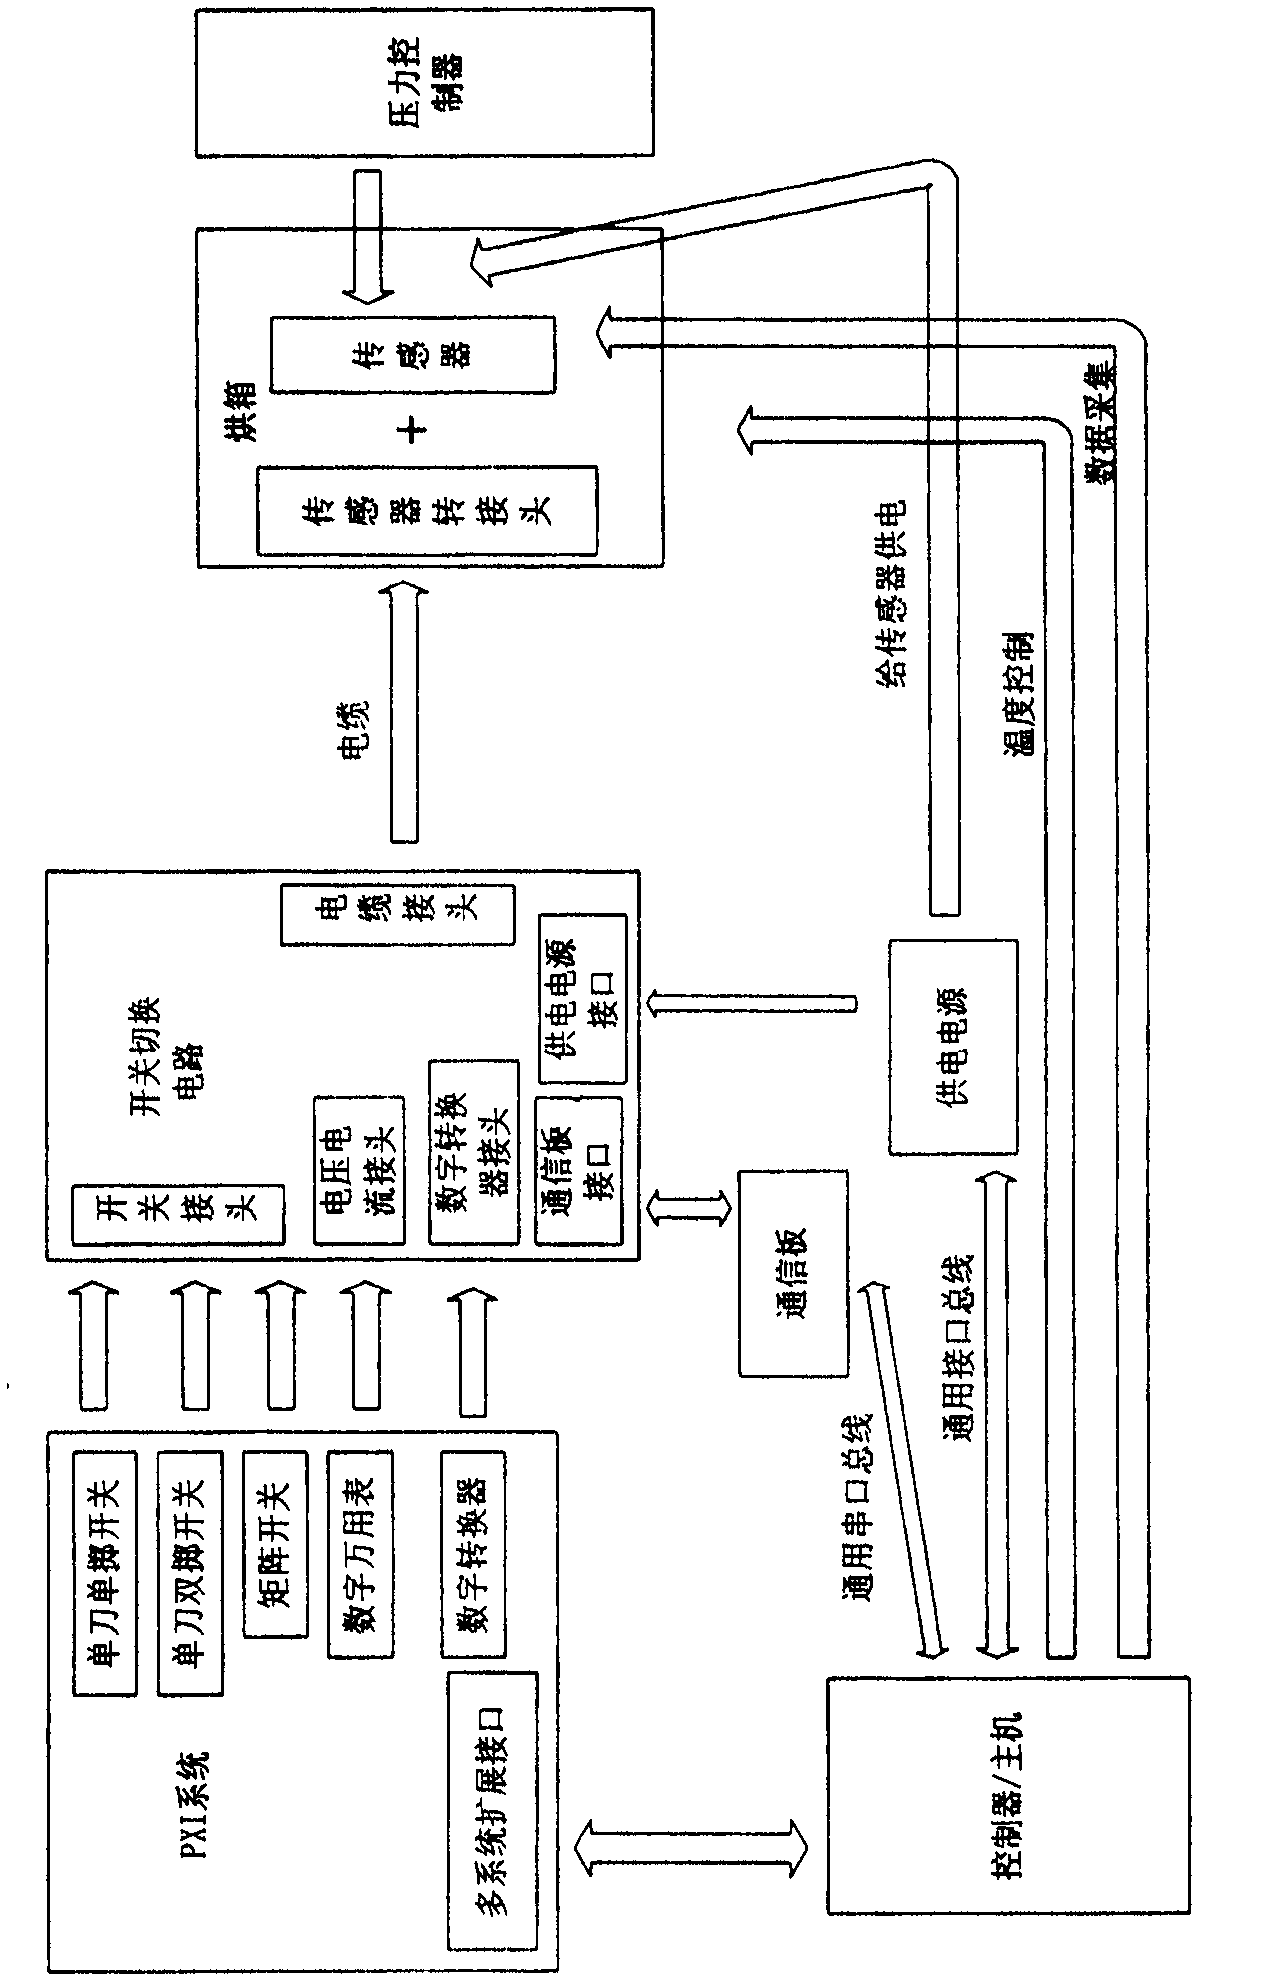 Data collecting device for micro tester